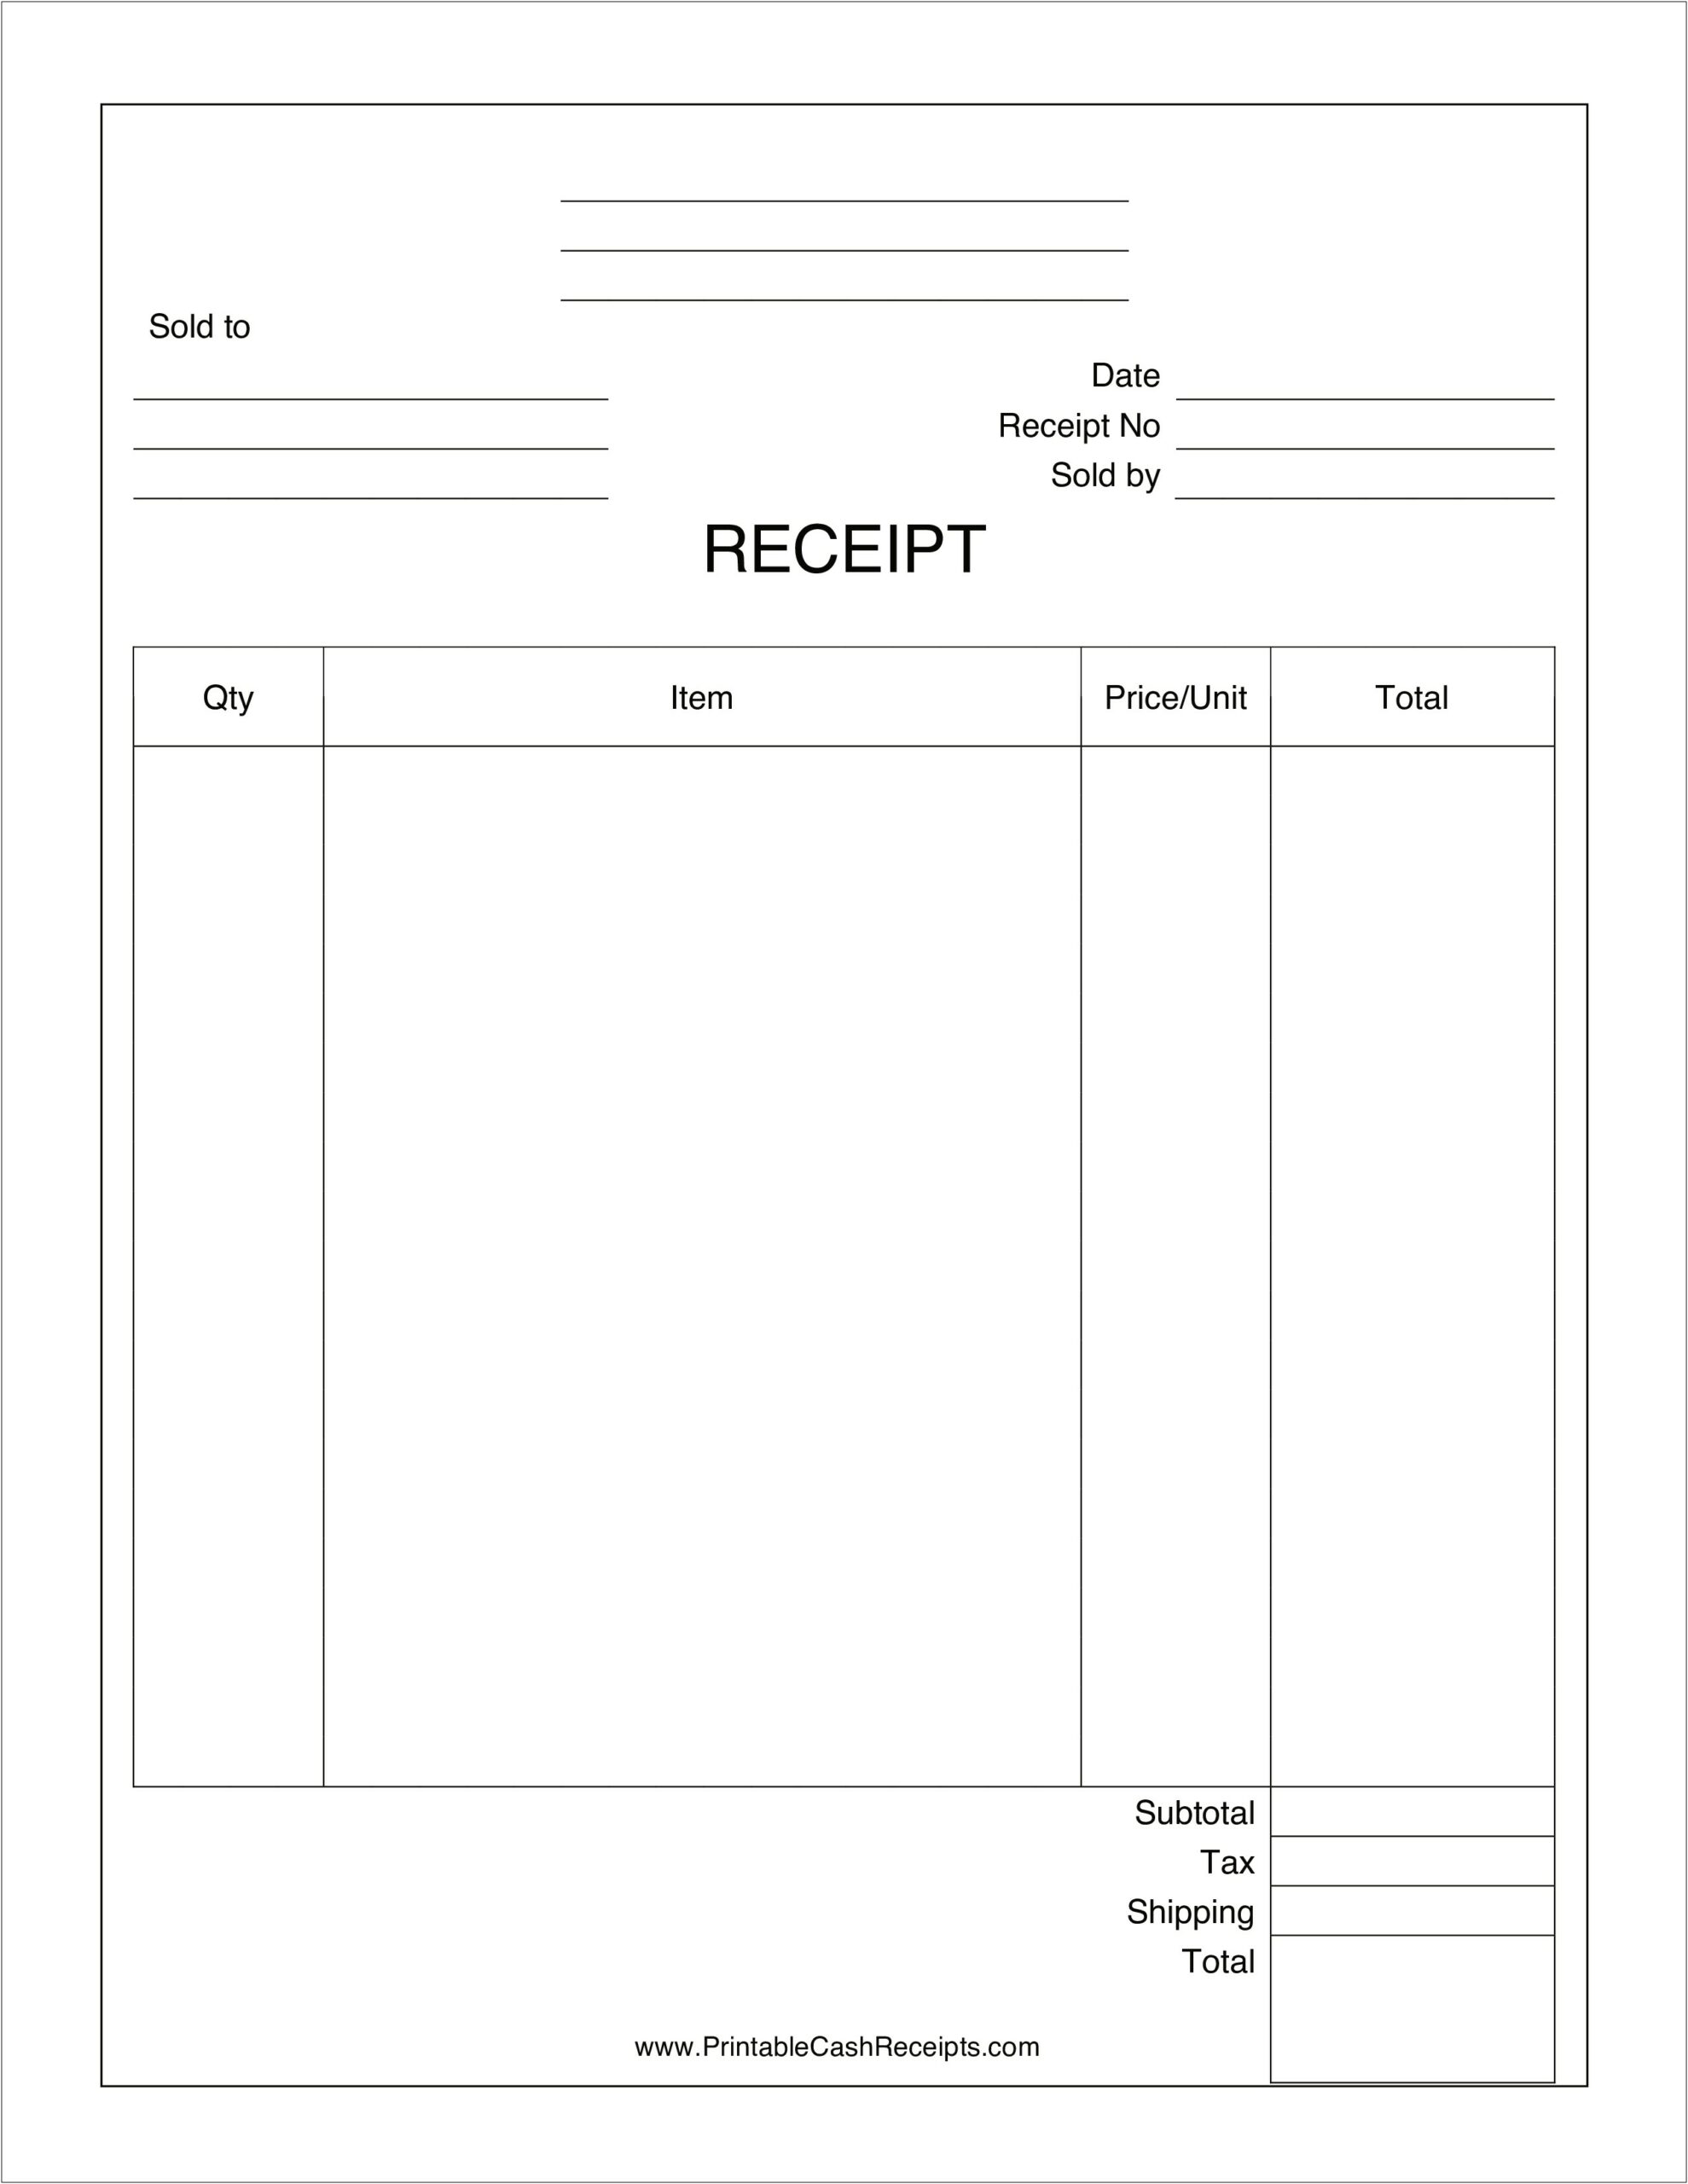 Acknowledgement Receipt Template Excel Free Download